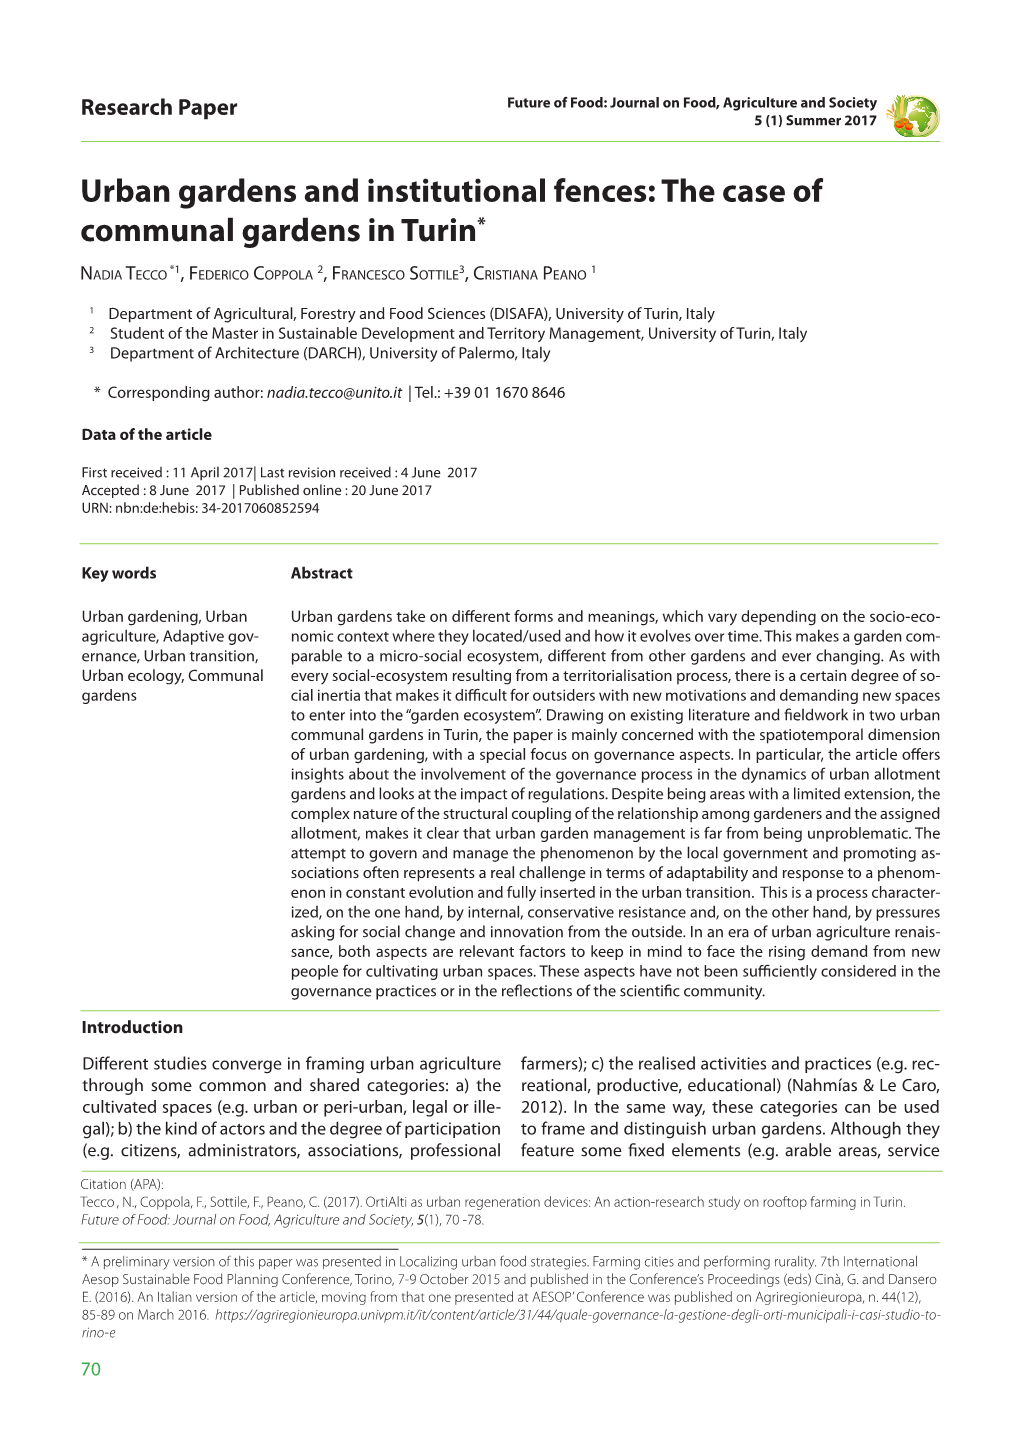 Urban Gardens and Institutional Fences: the Case of Communal Gardens in Turin*